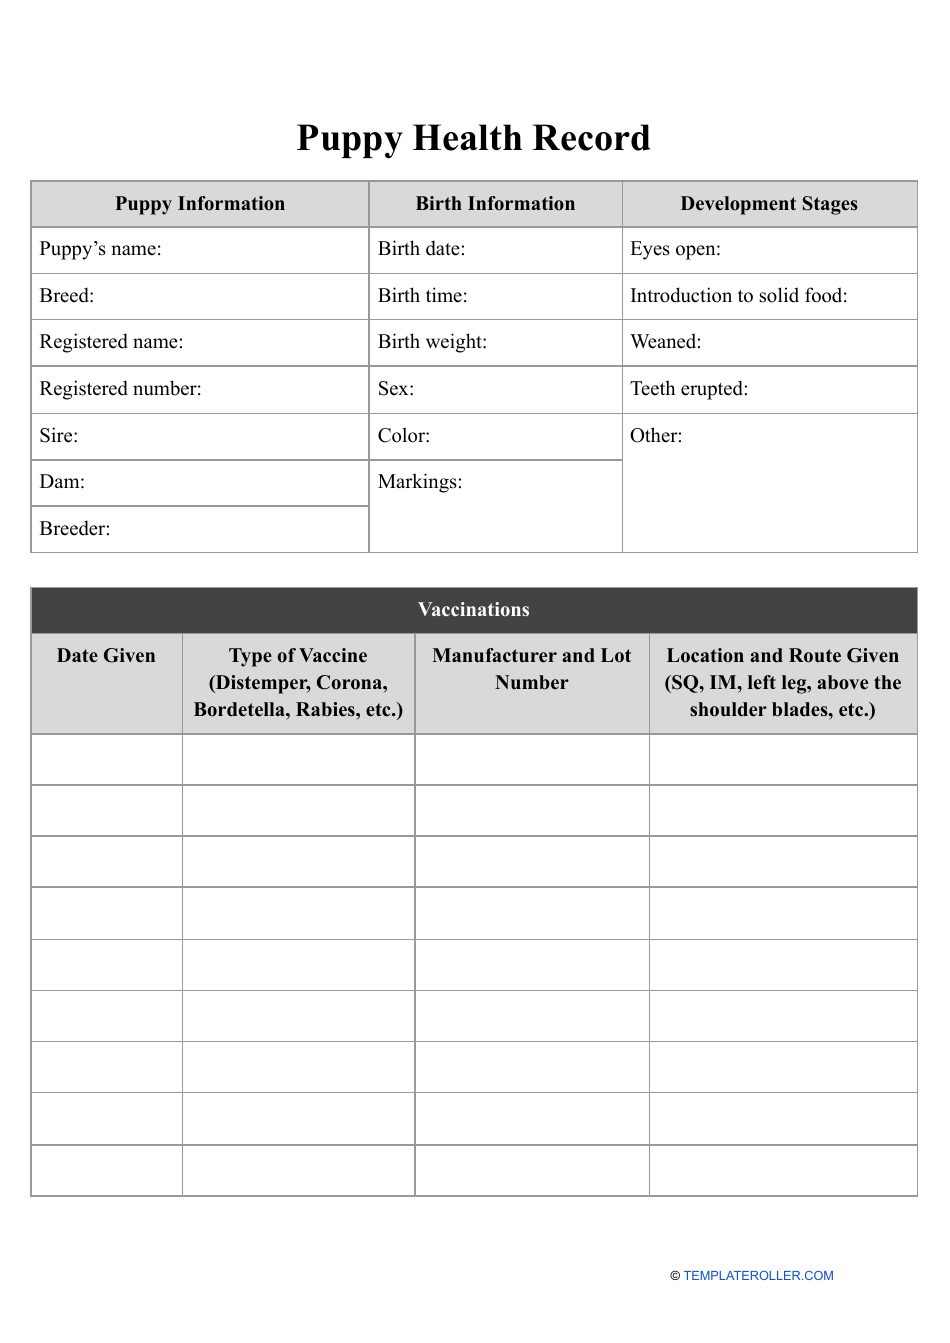 Puppy health record document - Comprehensive health record template for tracking the health and medical history of your adorable puppies.